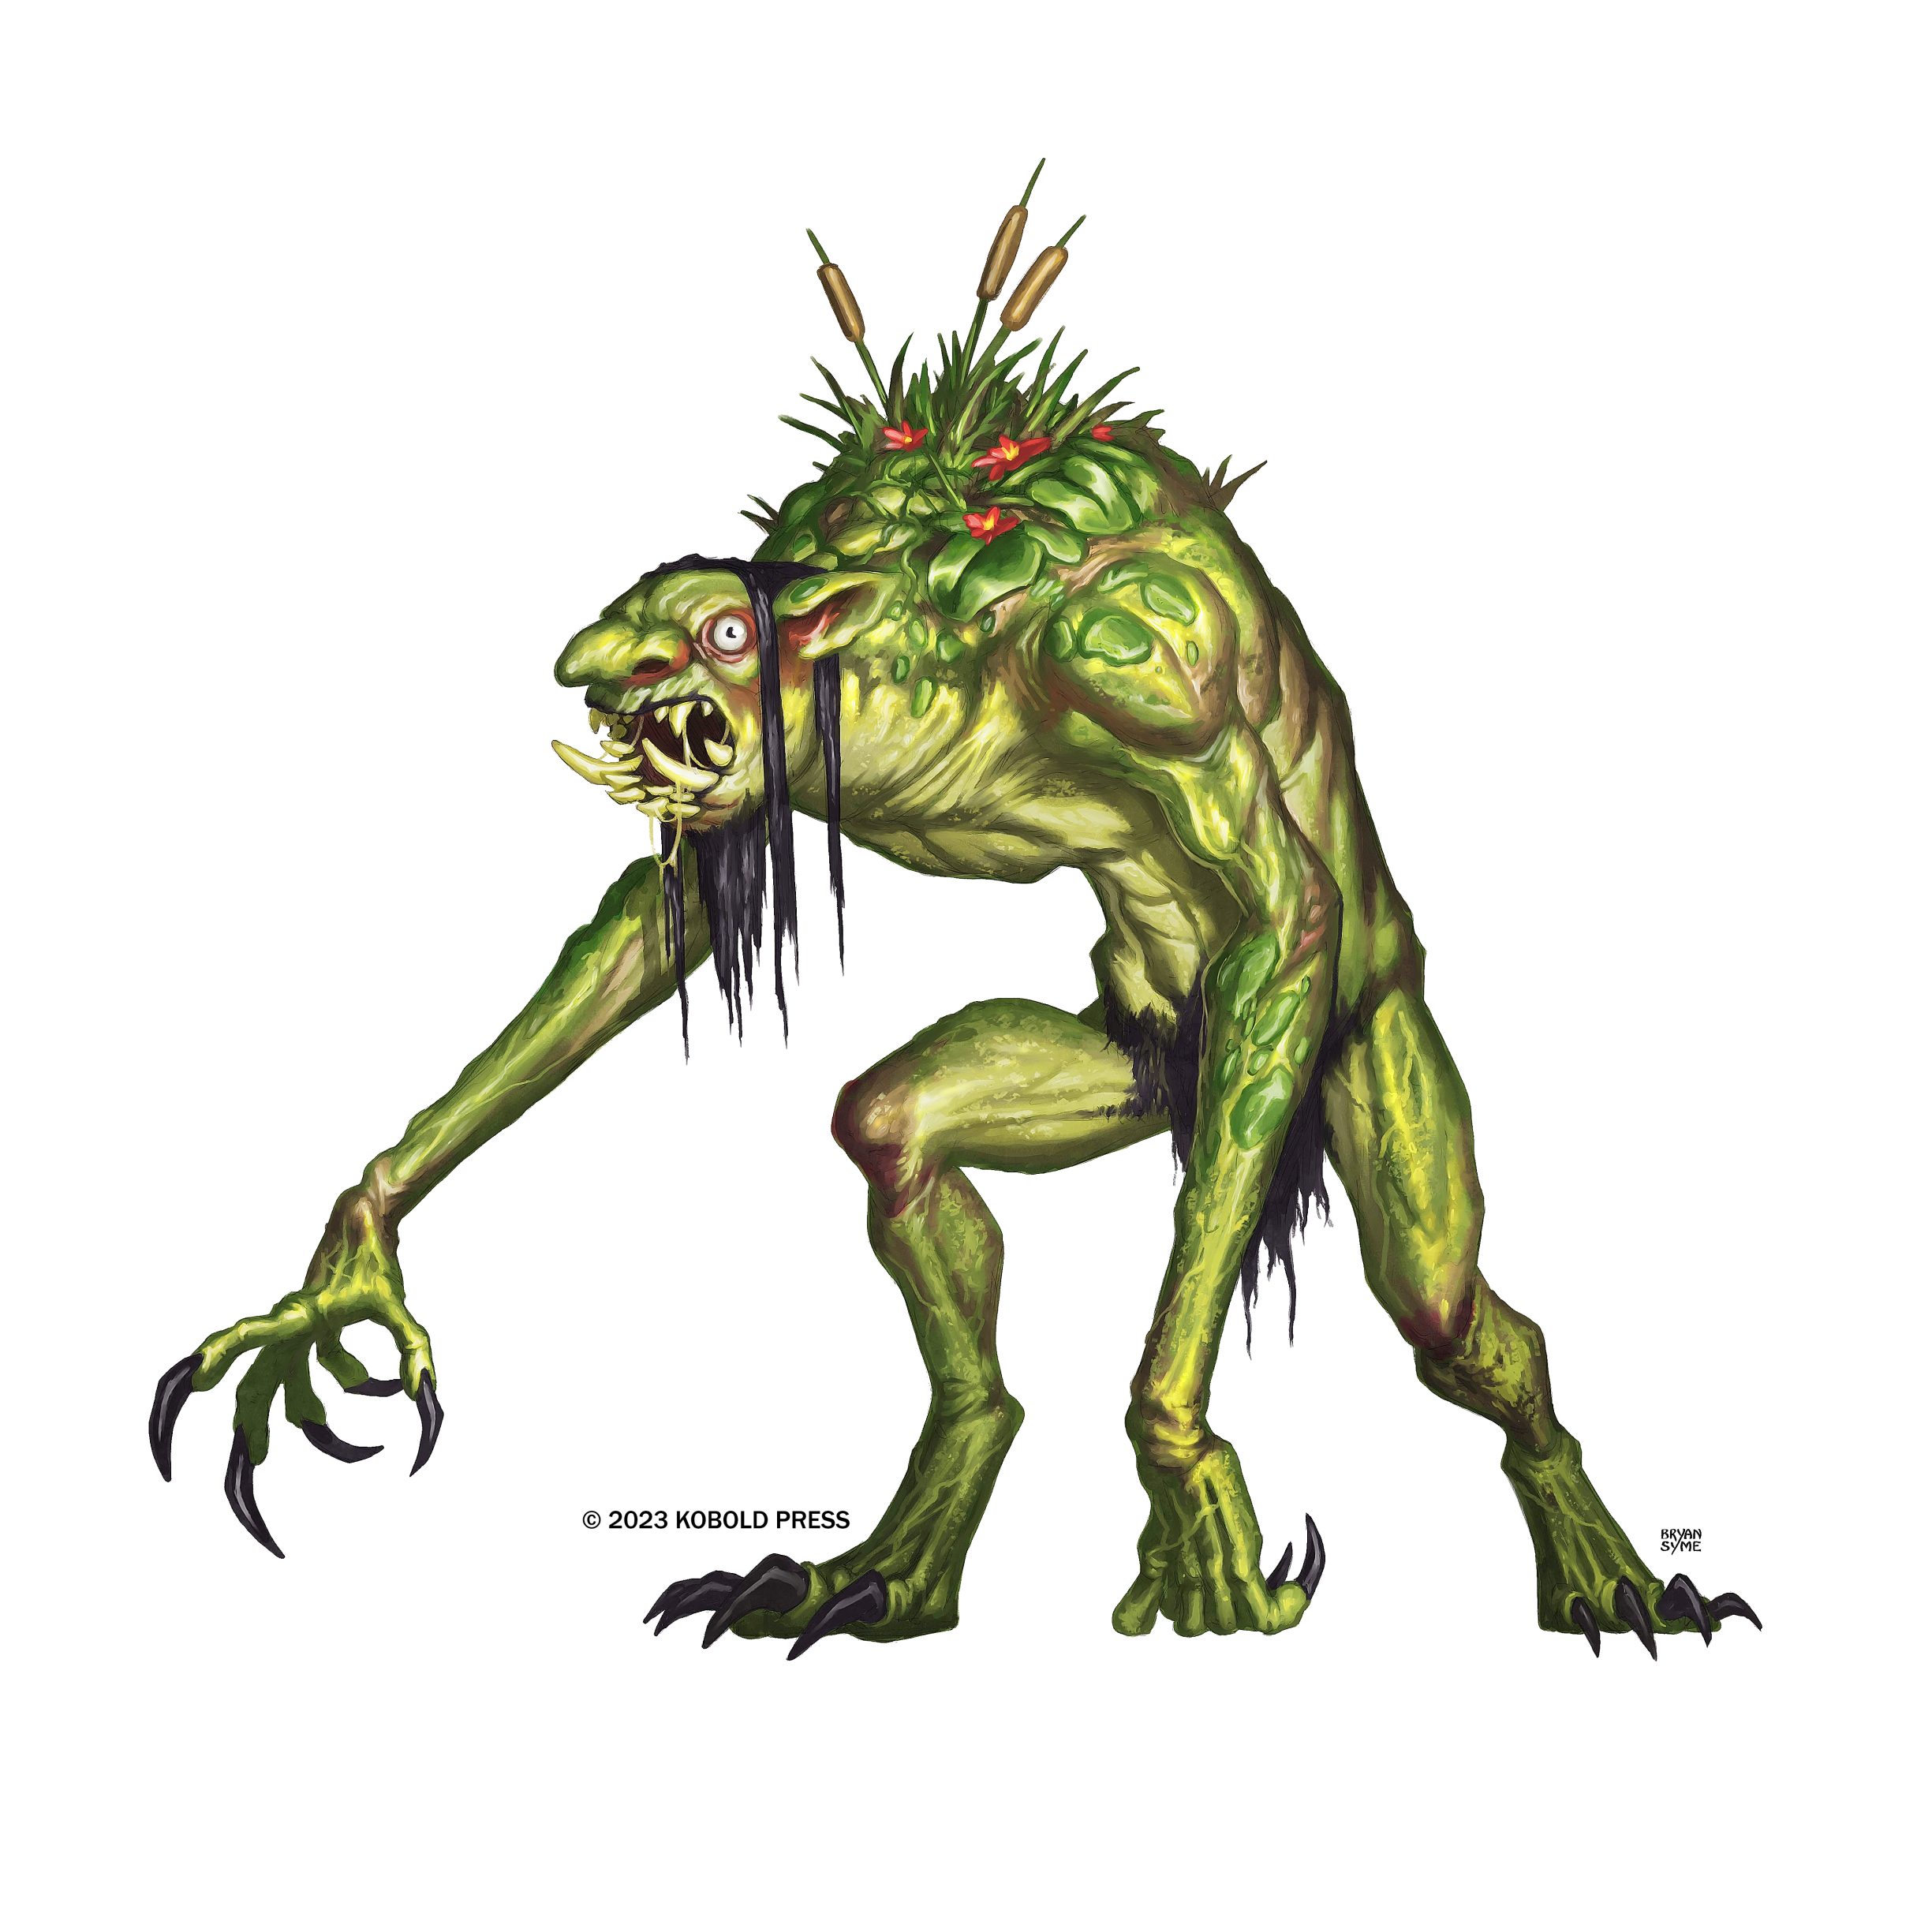 A bright green Troll with bulging eyes and jutting teeth hunches over with swamp plants growing off it's back.